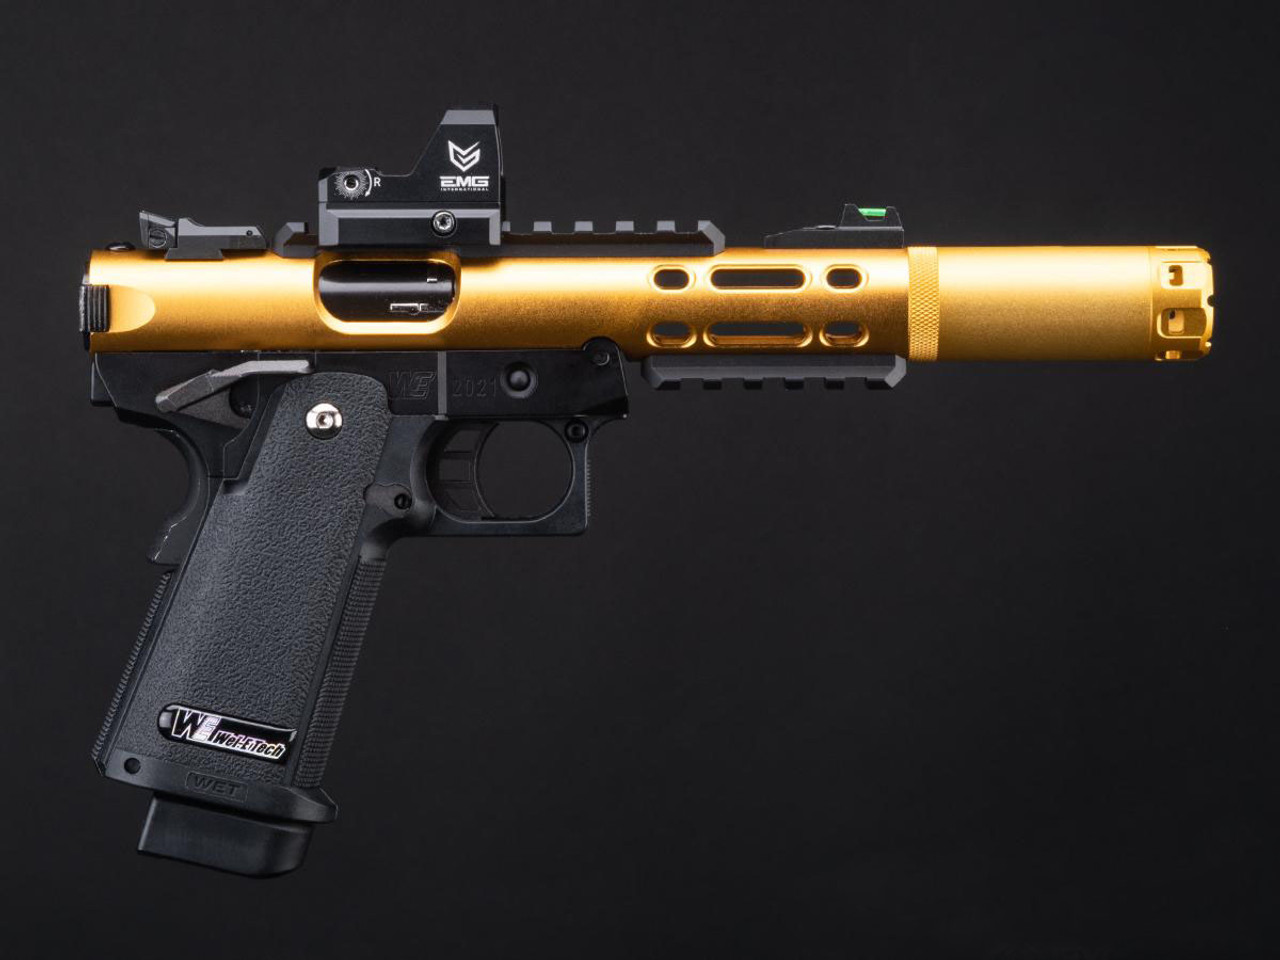 WE-Tech Galaxy Hi-CAPA Gas Blowback Airsoft Pistol (Color: Gold / Classic Frame / Tracer Package)